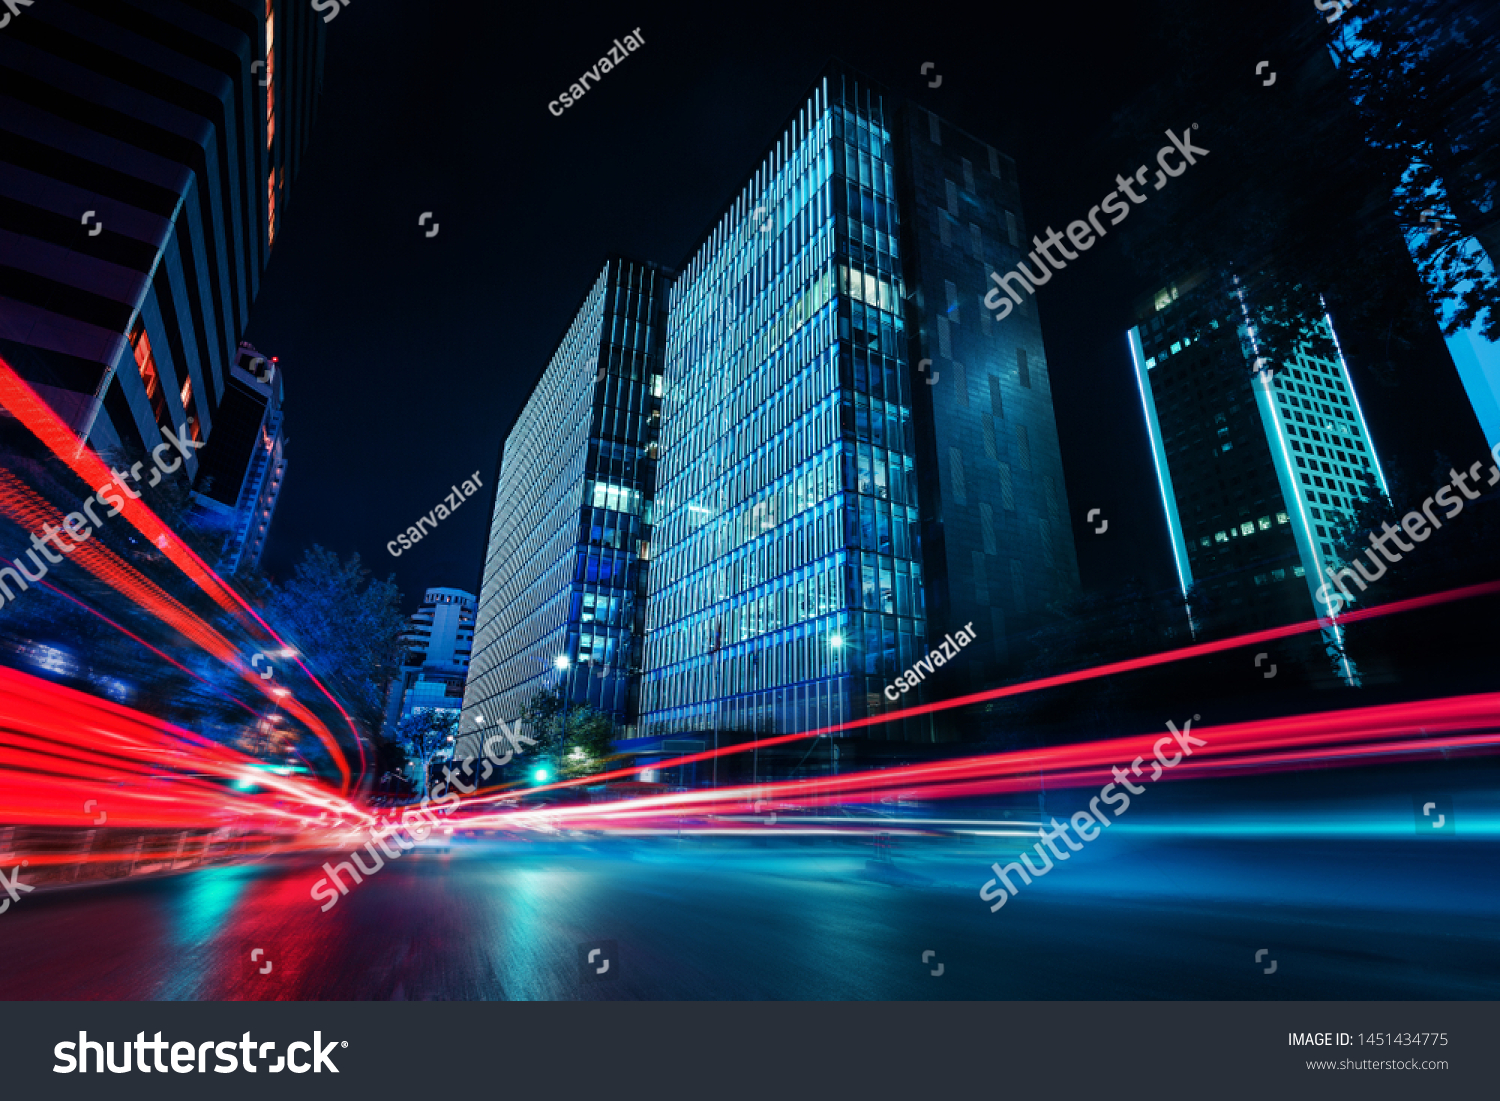 Light trails at night in urban environment #1451434775